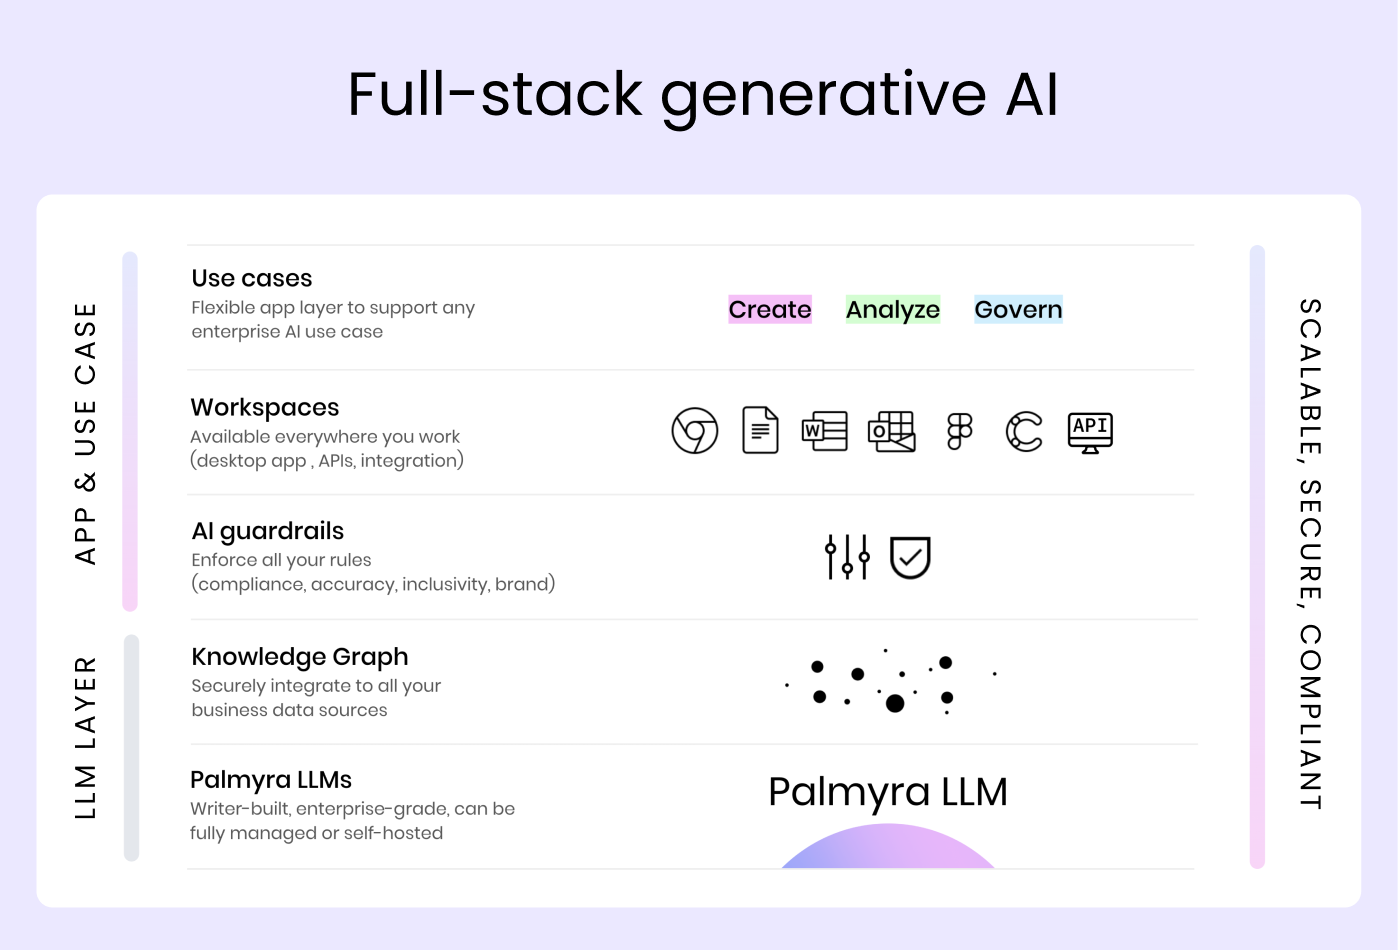 Full-stack generative AI

Use cases: Flexible app layer to support any enterprise AI use case

Workspaces: Available everywhere you work (desktop app, APIs, integration)

AI guardrails: Enforce all your rules (compliance, accuracy, inclusivity, brand)

Knowledge Graph: Securely integrate to all your business data sources

Palmyra LLMs: Writer-built, enterprise-grade, can be fully managed or self-hosted